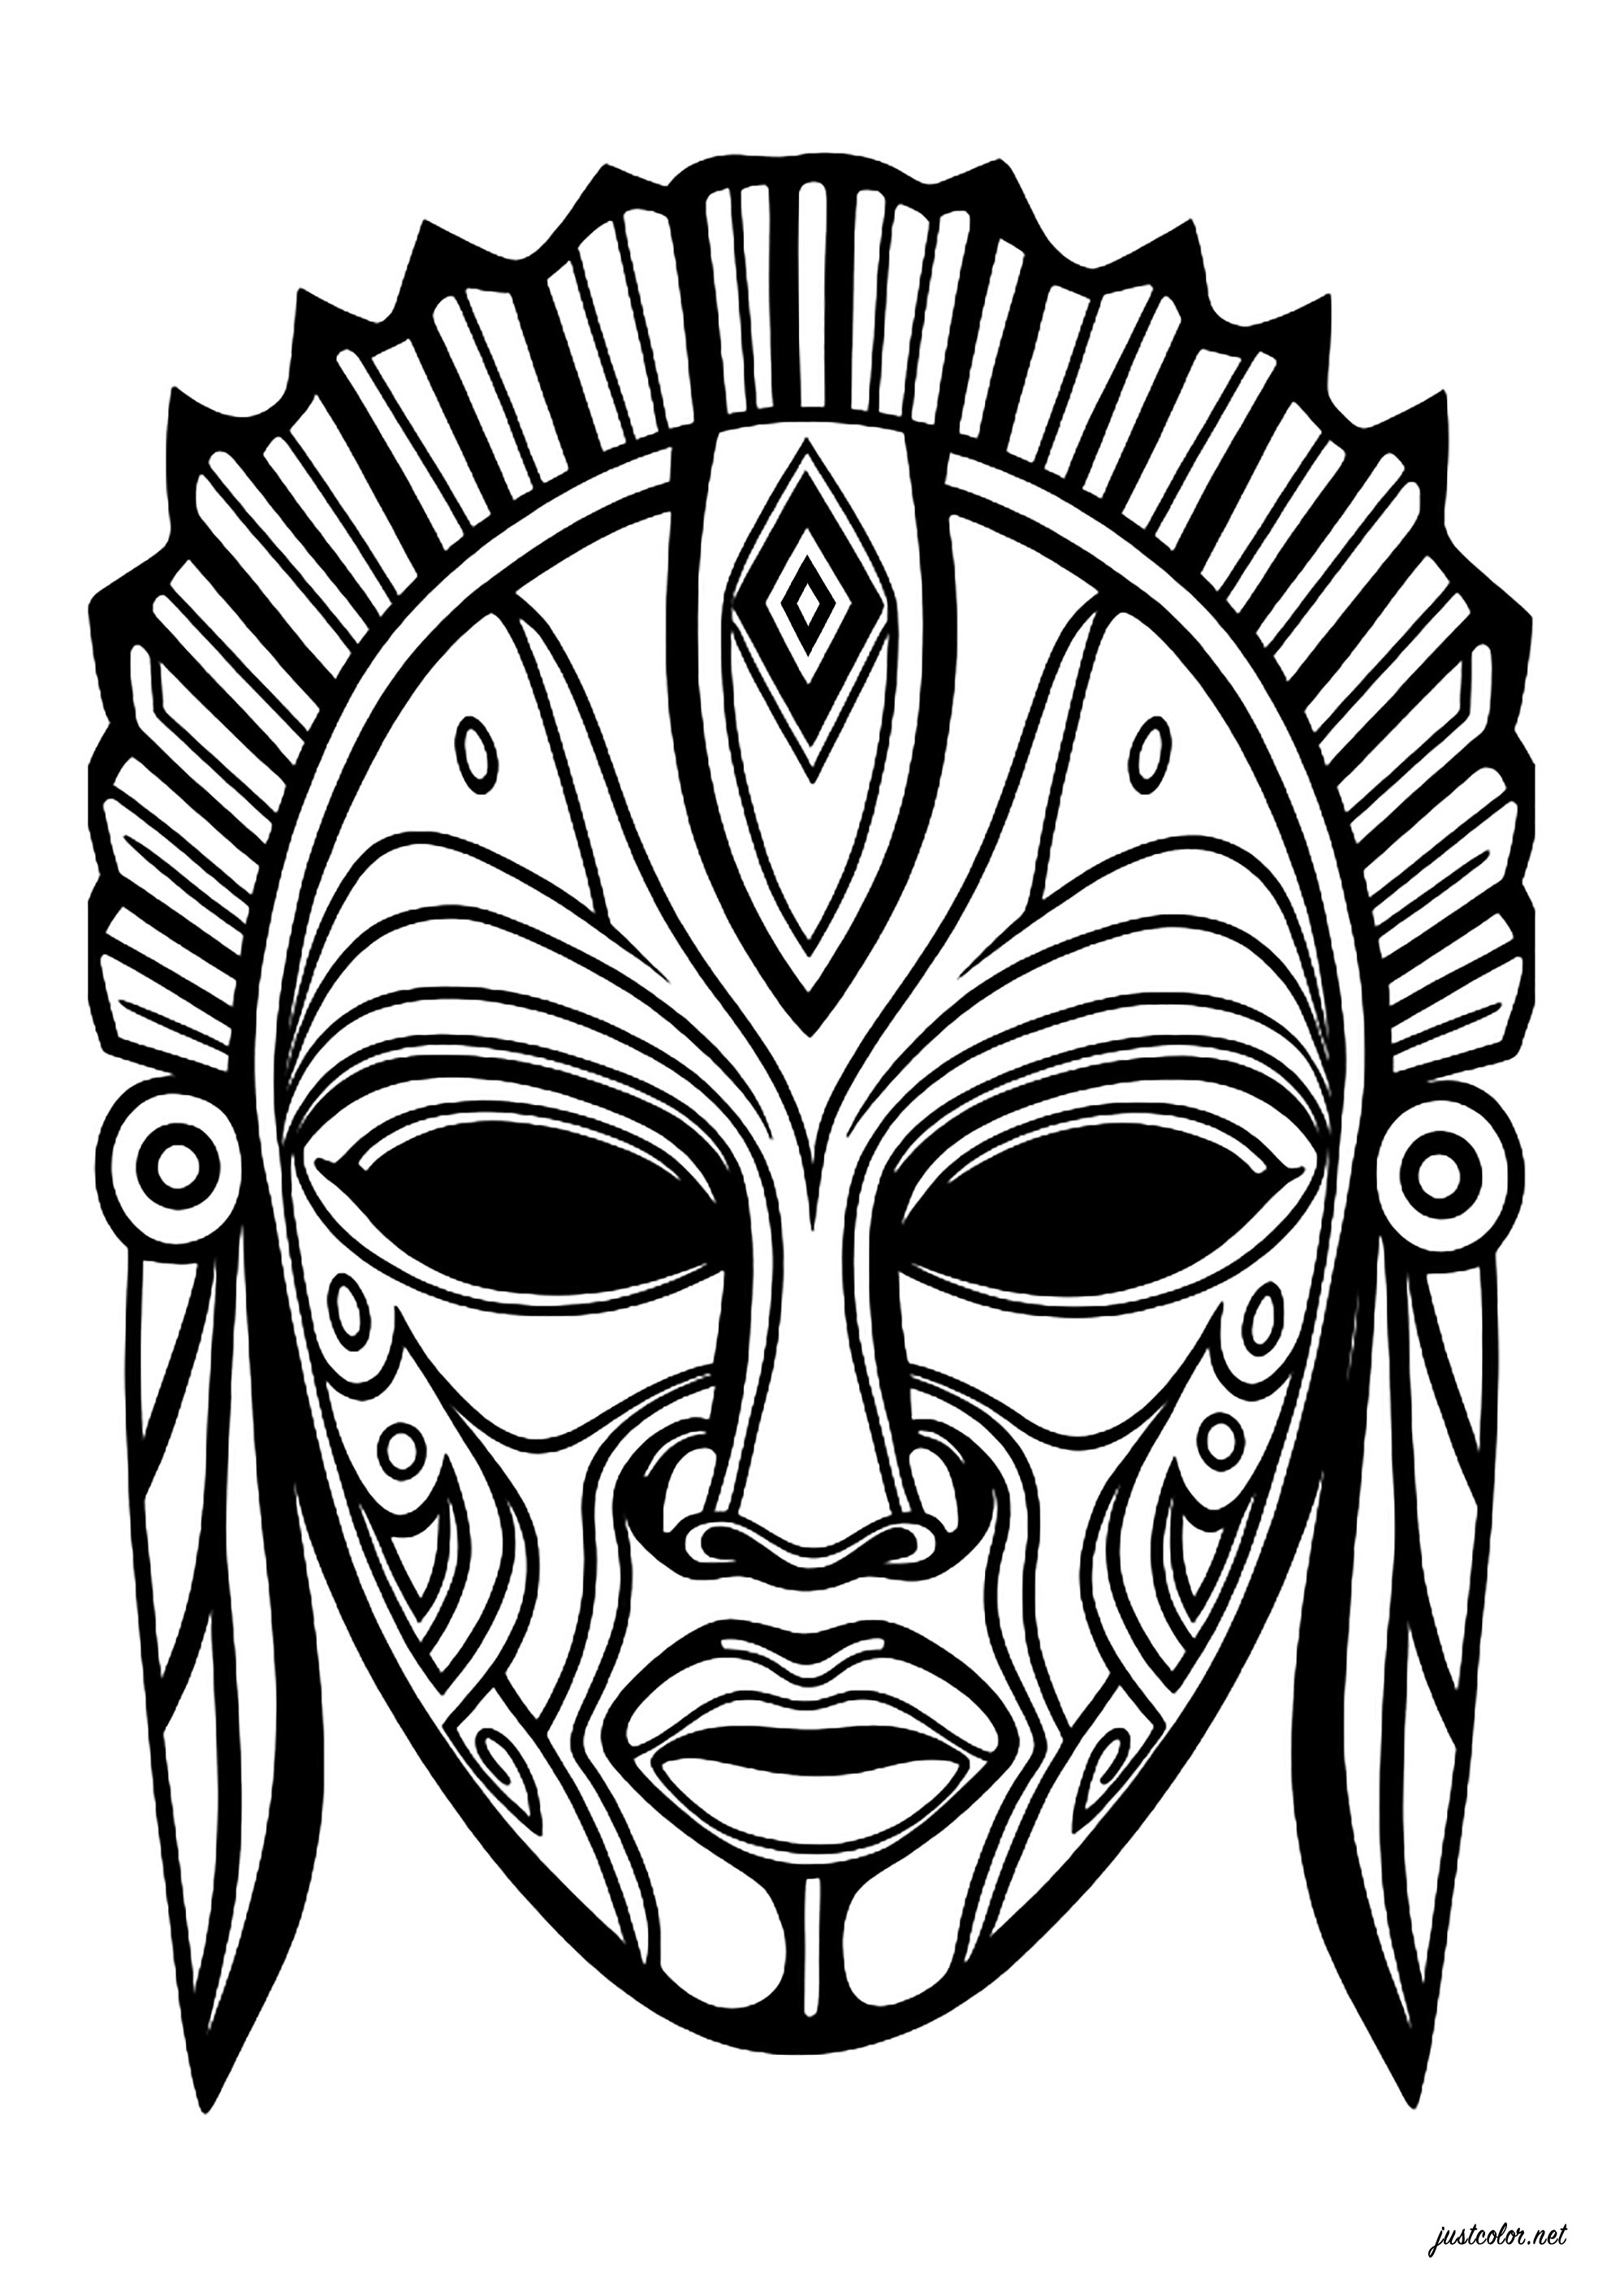 Imaginary mask, inspired by African masks. Many interior patterns, allowing you to color the mask with many colors